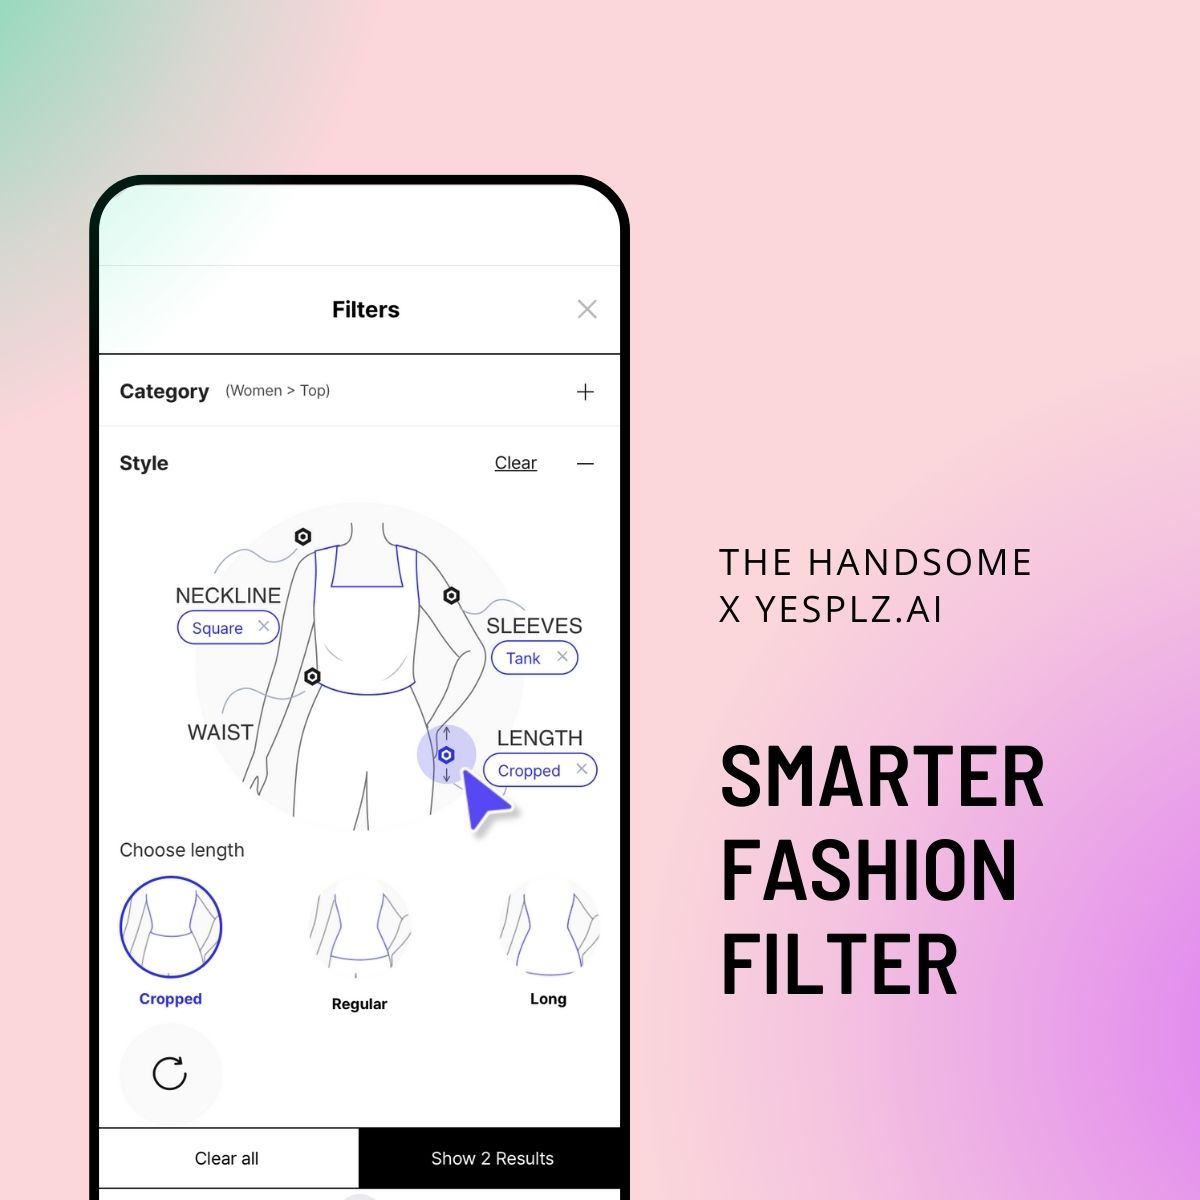 A virtual mannequin filter (aka smart product filter) for The Handsome Korea